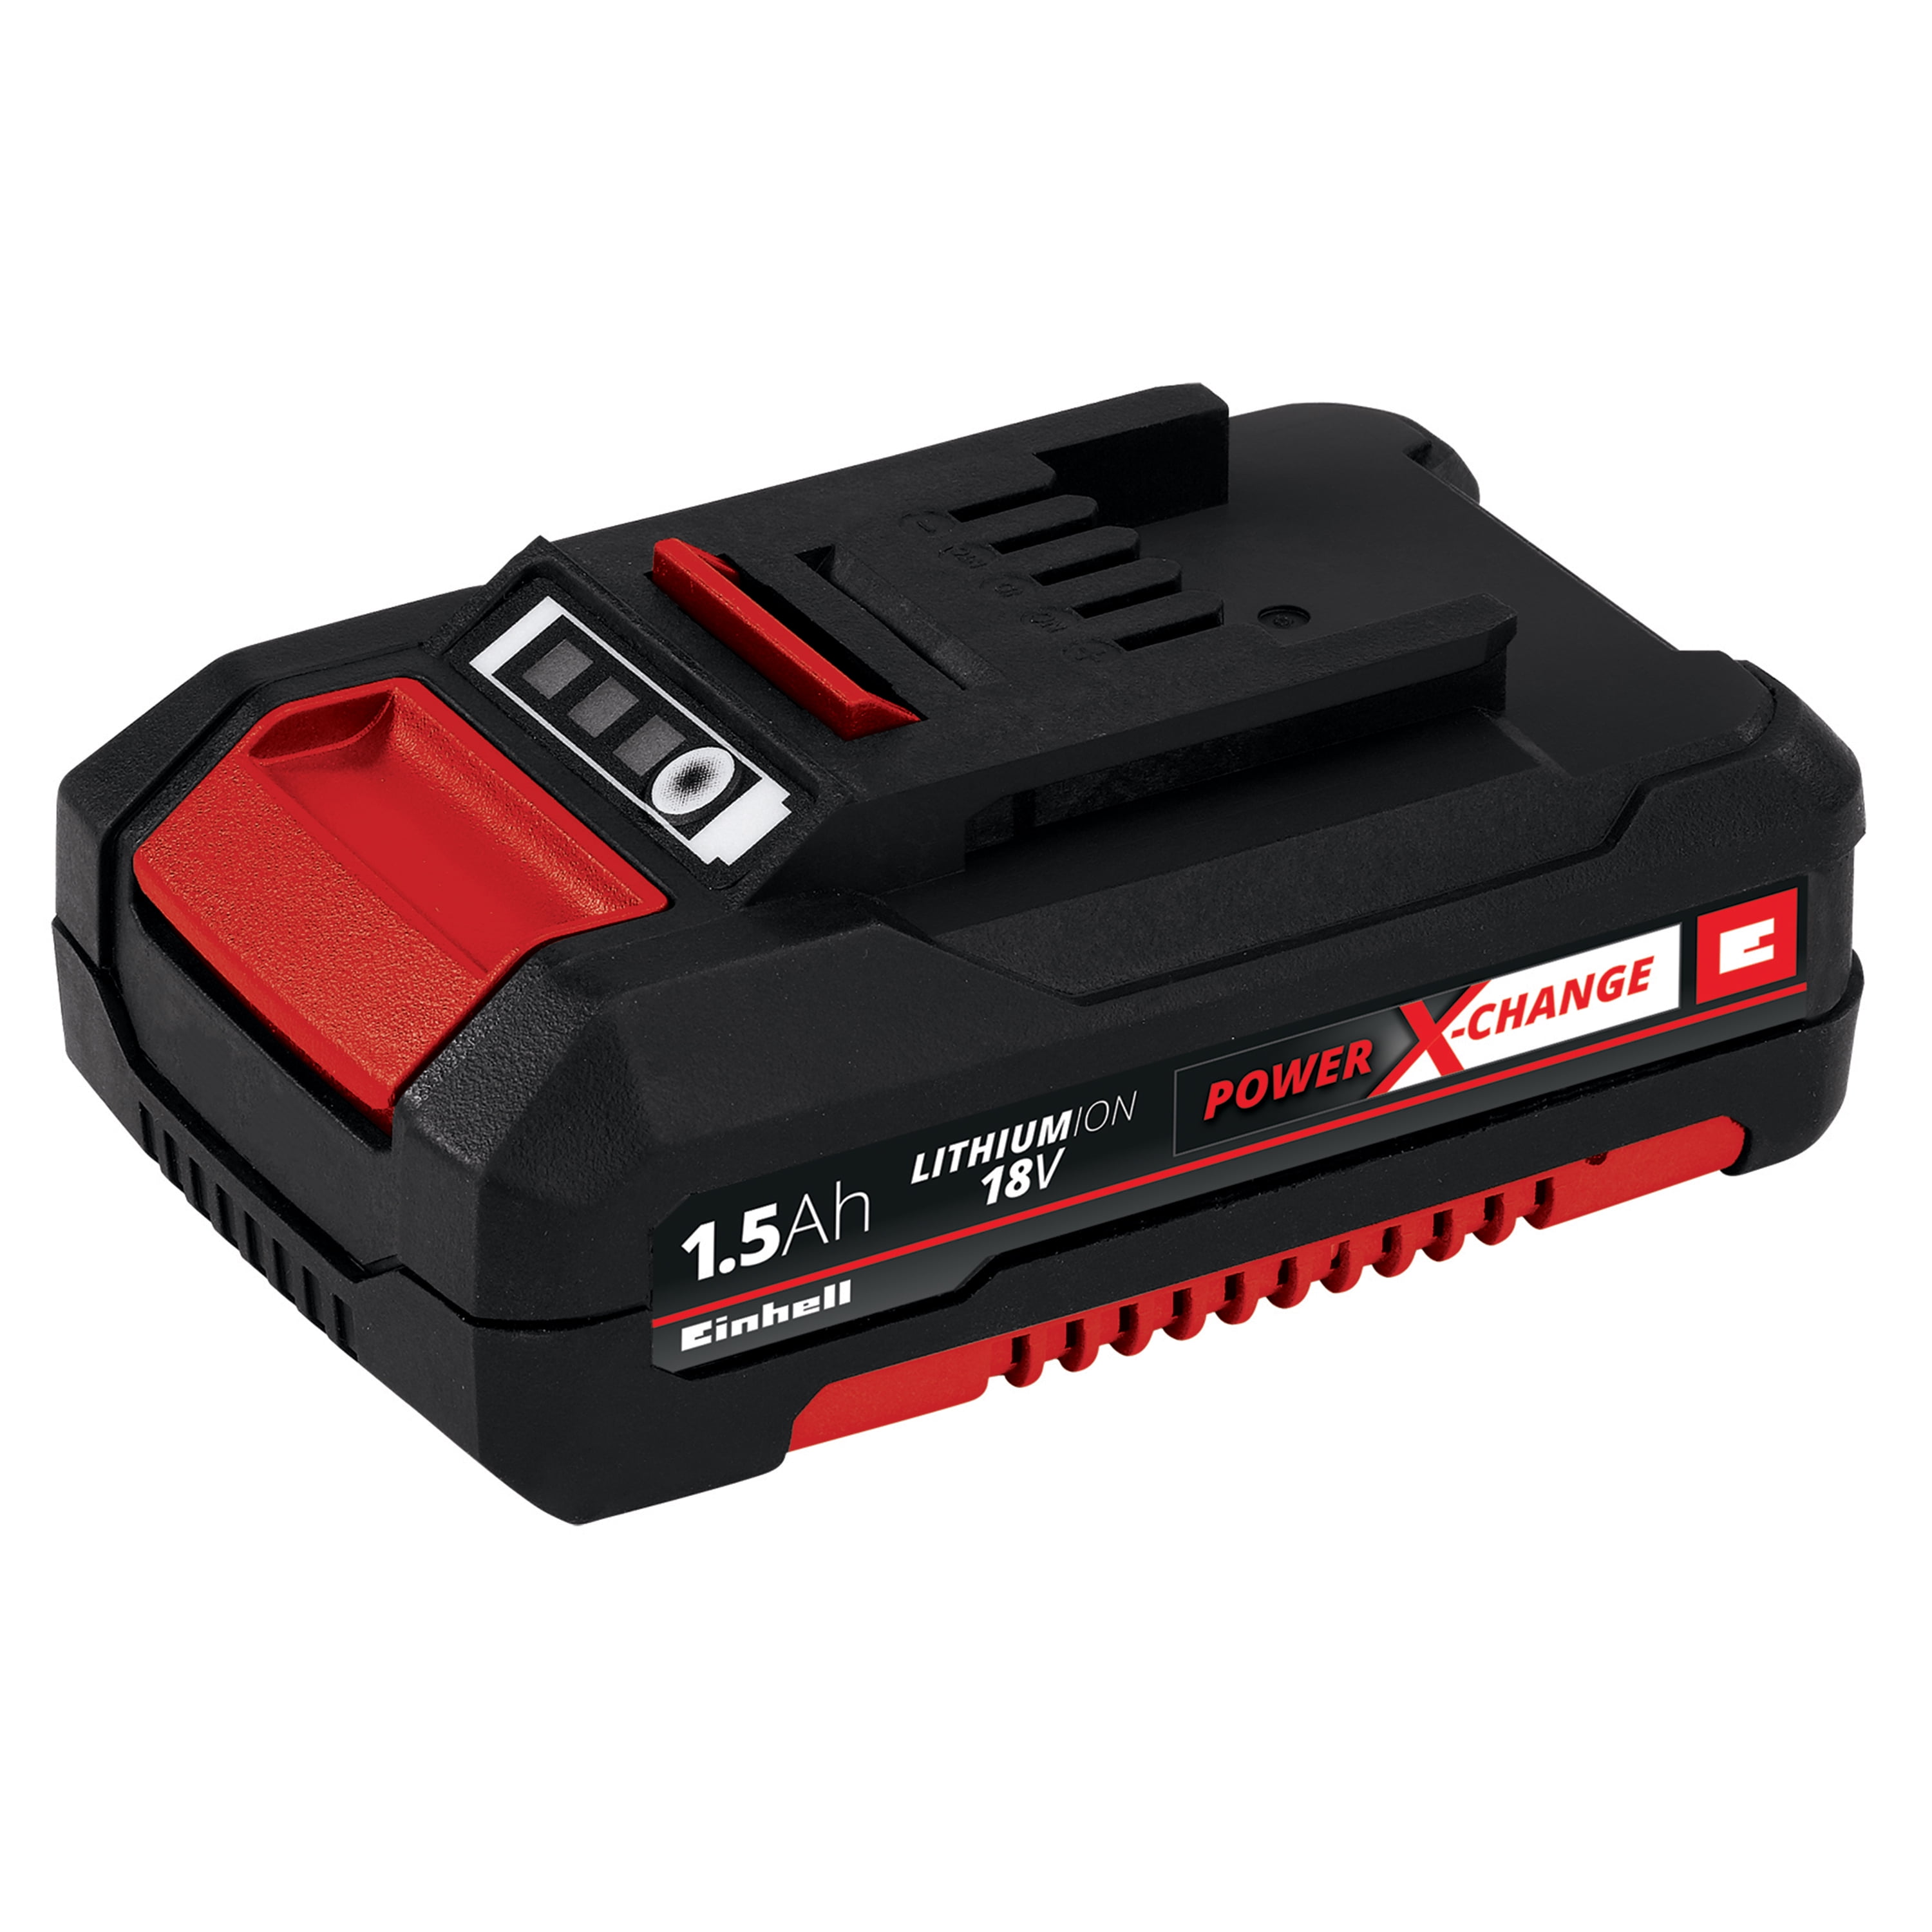 Einhell Power X-Change 18-Volt Lithium-Ion Compact Battery, 1.5